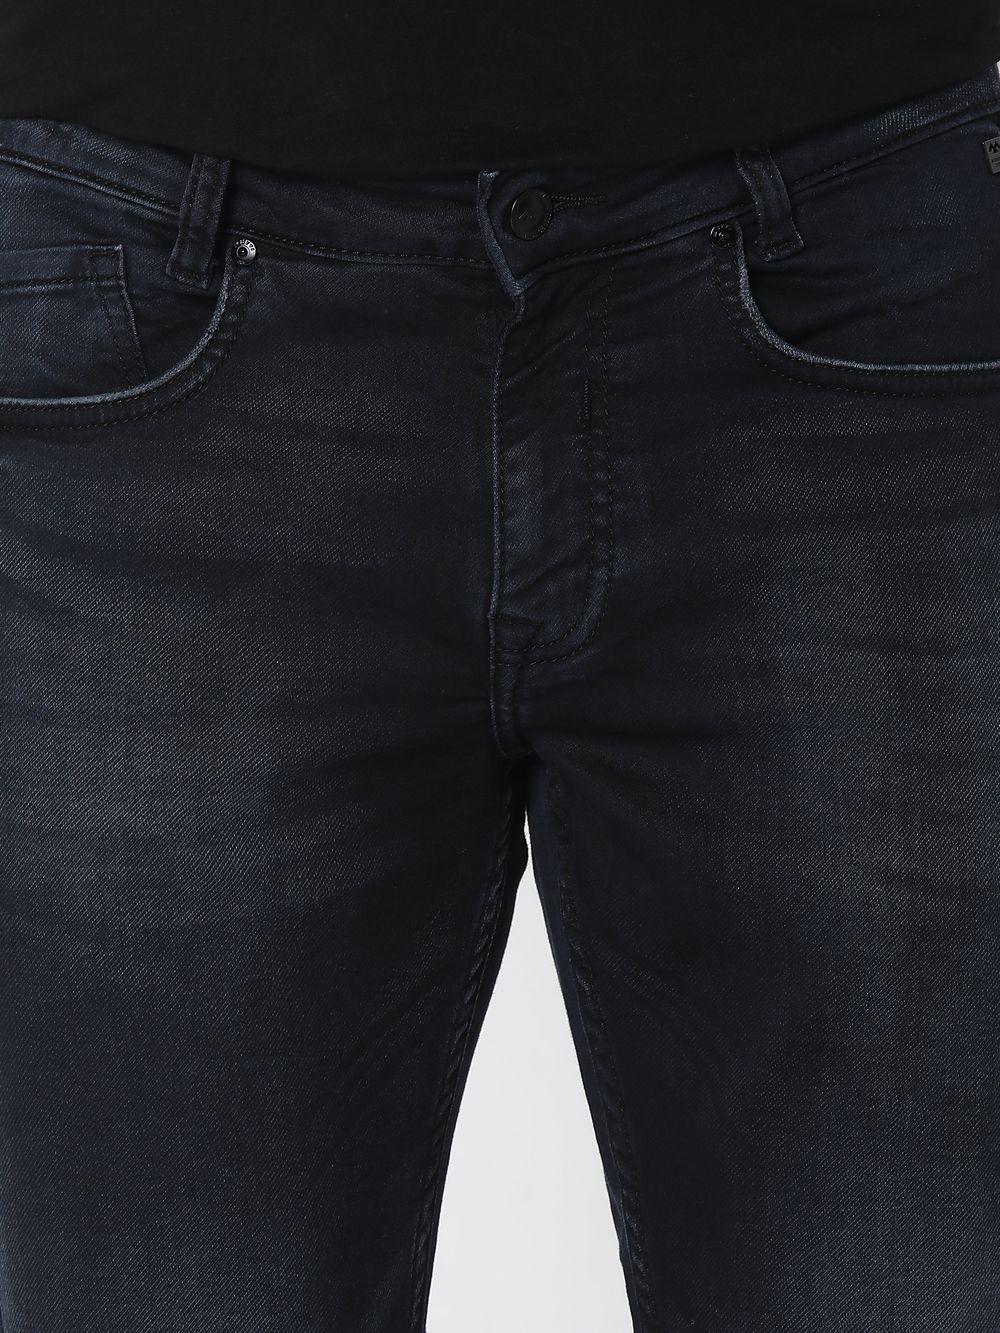 Charcoal Super Slim Fit Fly Weight Jeans